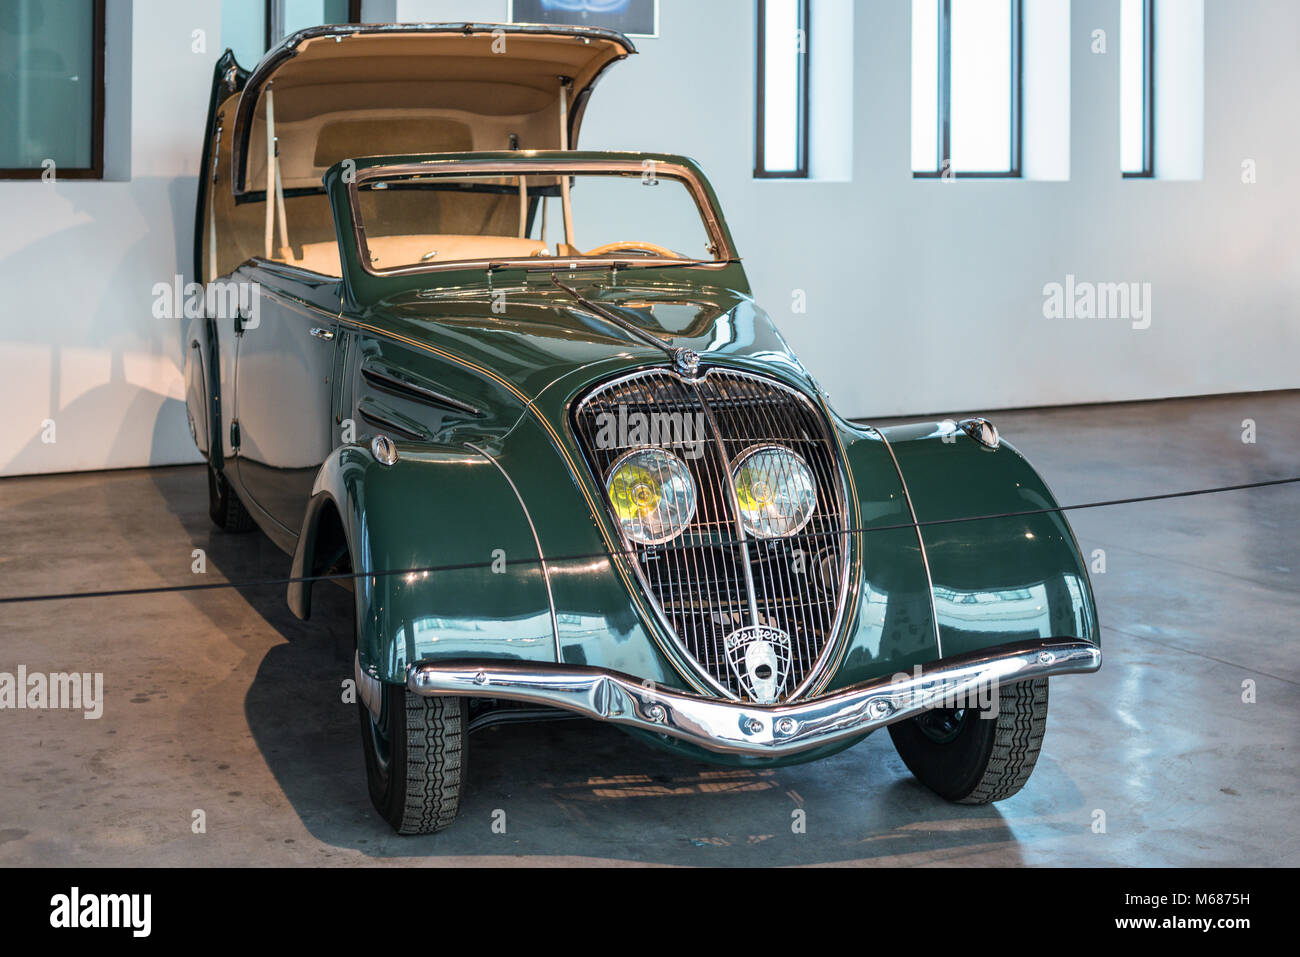 Malaga, Spain - December 7, 2016: Vintage Peugeot Eclipse France 1937 car displayed at Malaga Automobile and Fashion Museum in Spain. Stock Photo